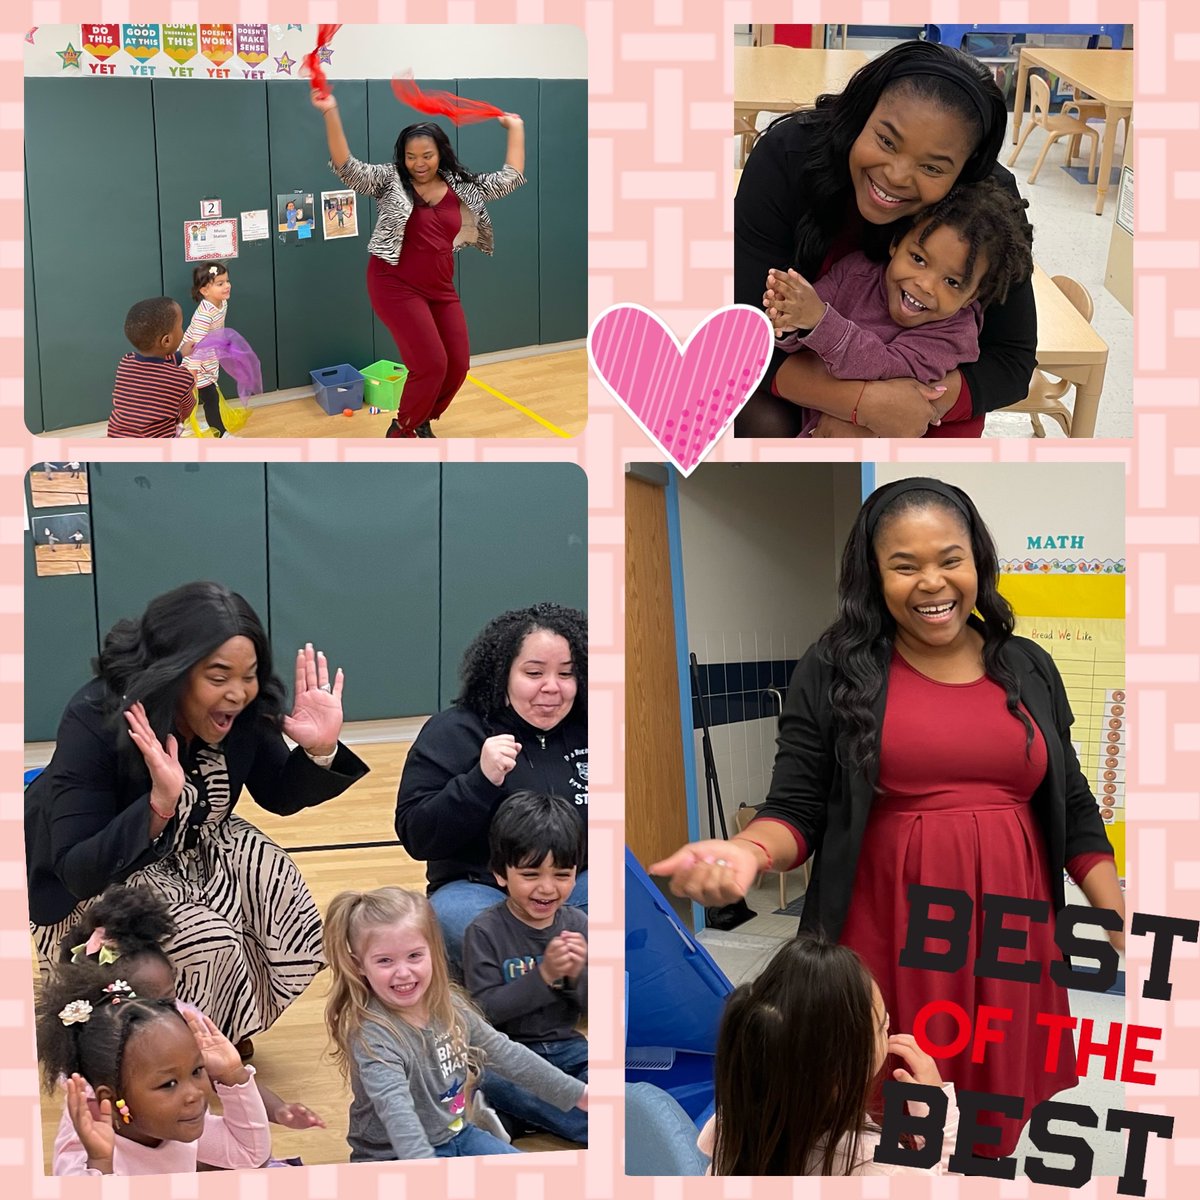 Happy Principal’s Appreciation Day to our amazing leader @EdeleWilliams. We can’t wait to celebrate you today to thank you for the guidance, love, dedication and patience you show us every day @DrMarionWilson @D31DSPalton @CSD31SI @CChavezD31 @Natalie_Iacono @FollowCSA @NYCESPA